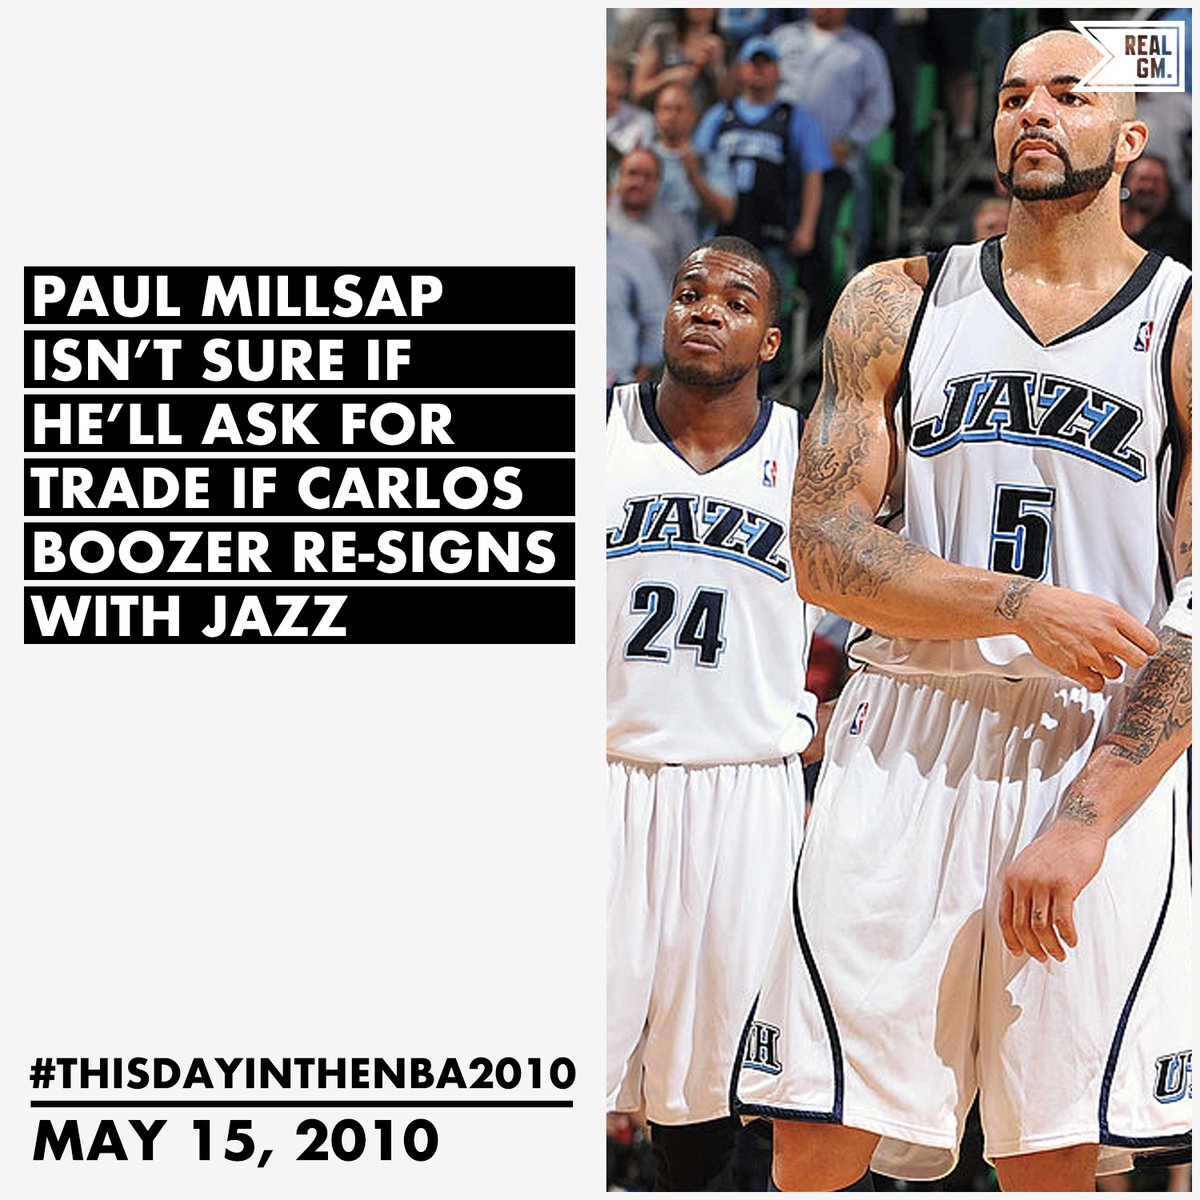  #ThisDayInTheNBA2010May 15, 2010Paul Millsap Isn't Sure If He'd Ask For Trade If Carlos Boozer Re-Signs With Jazz https://basketball.realgm.com/wiretap/203916/Paul-Millsap-Isnt-Sure-If-Hed-Ask-For-Trade-If-Carlos-Boozer-Re-Signs-With-Jazz